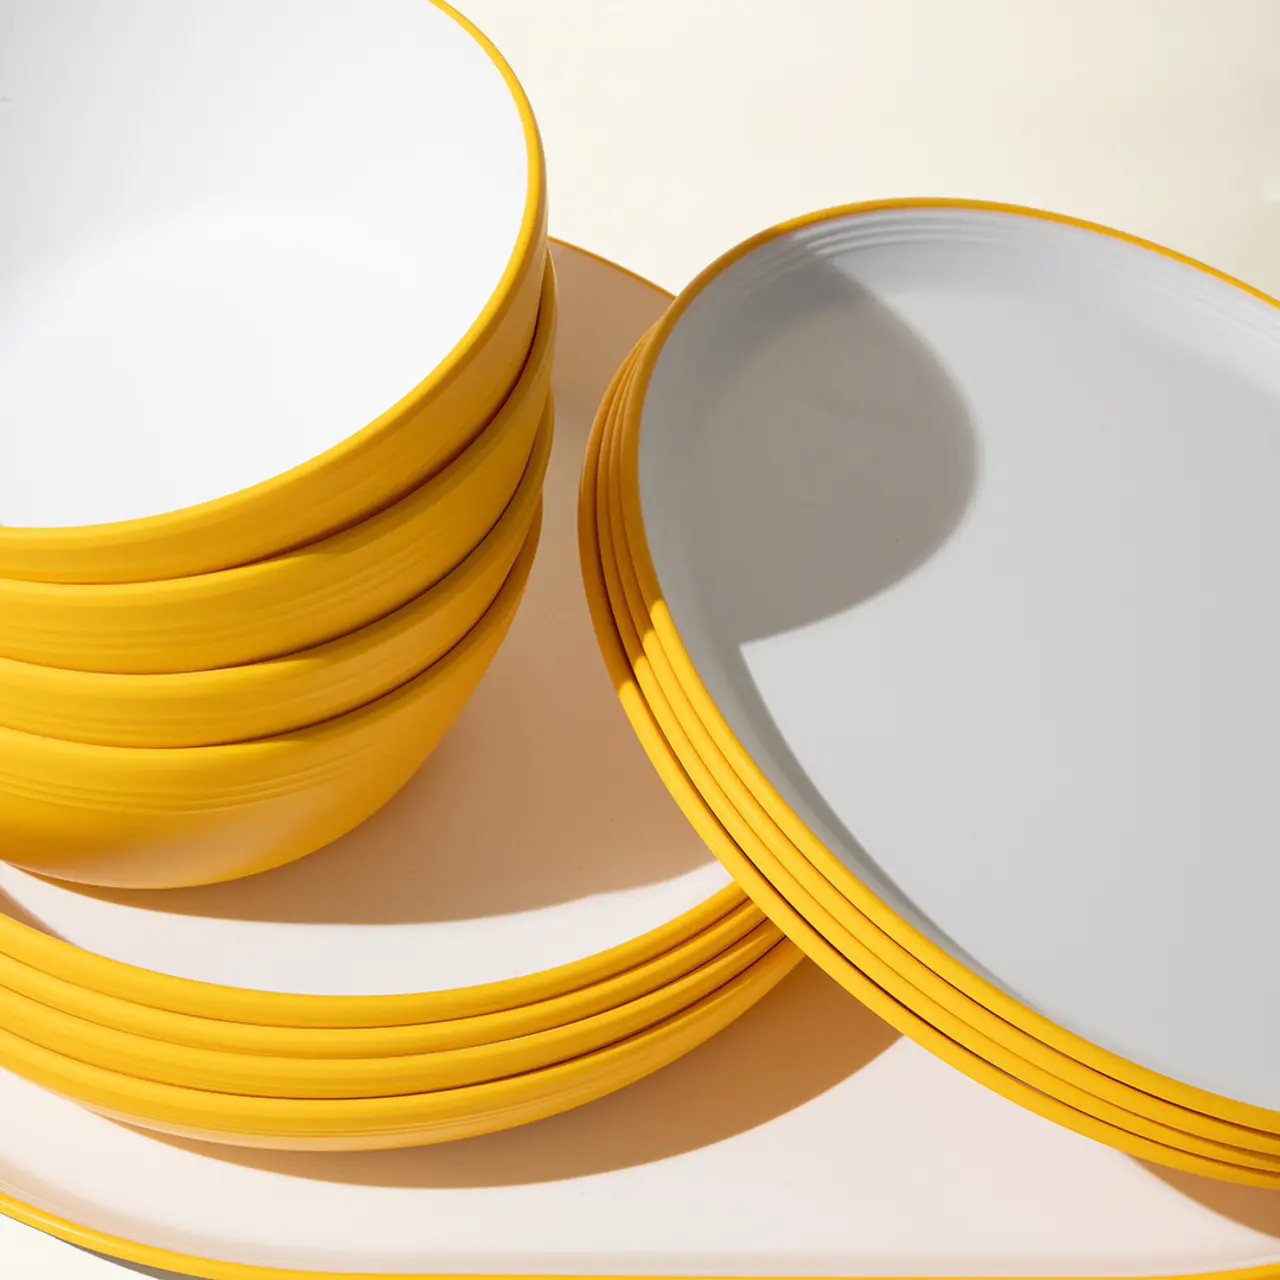 Stacks of yellow-edged plates are neatly arranged on a table, casting soft shadows in the light.